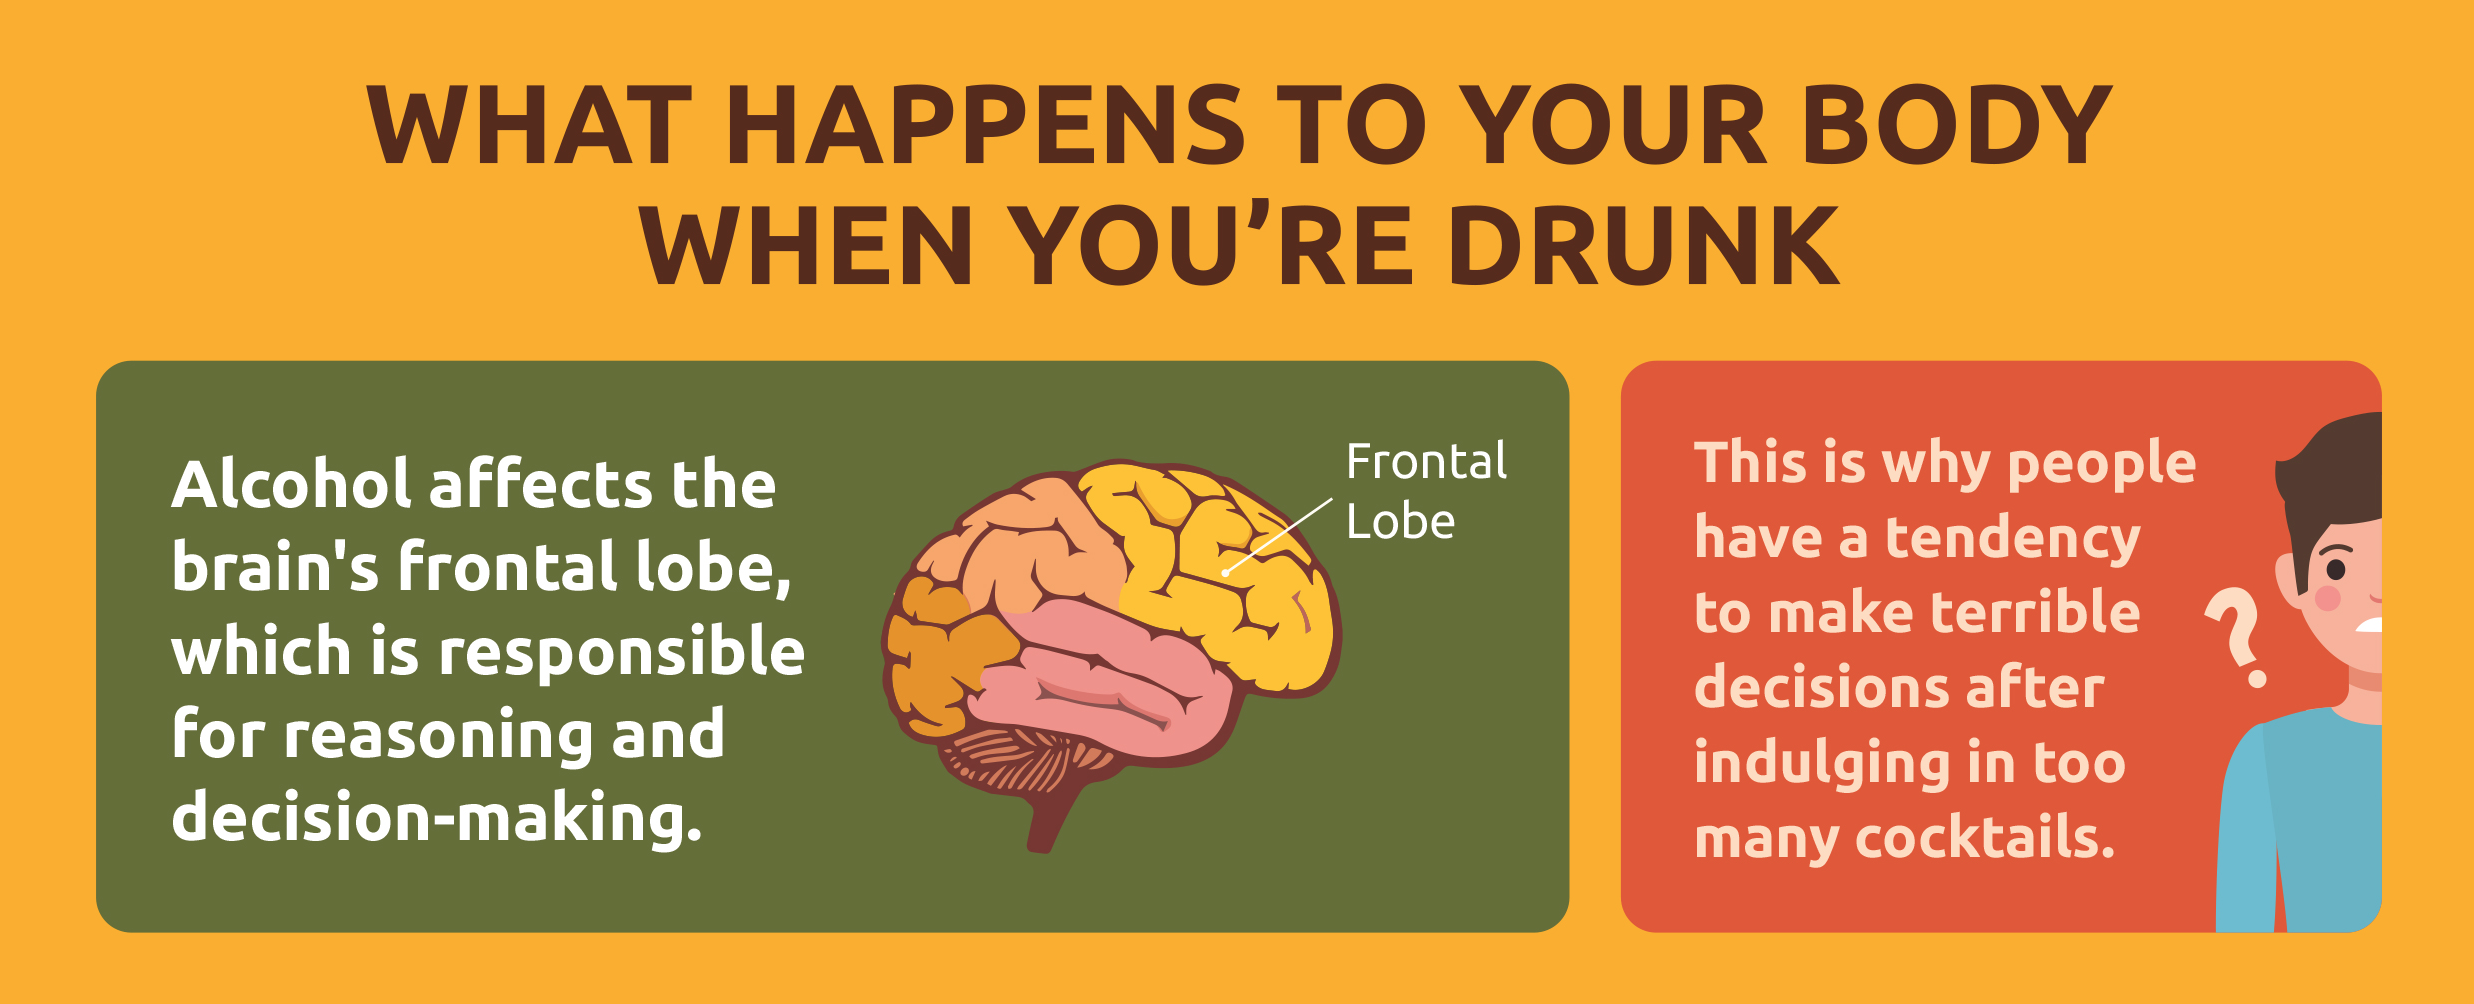 What Happens When You Re Drunk Infographic